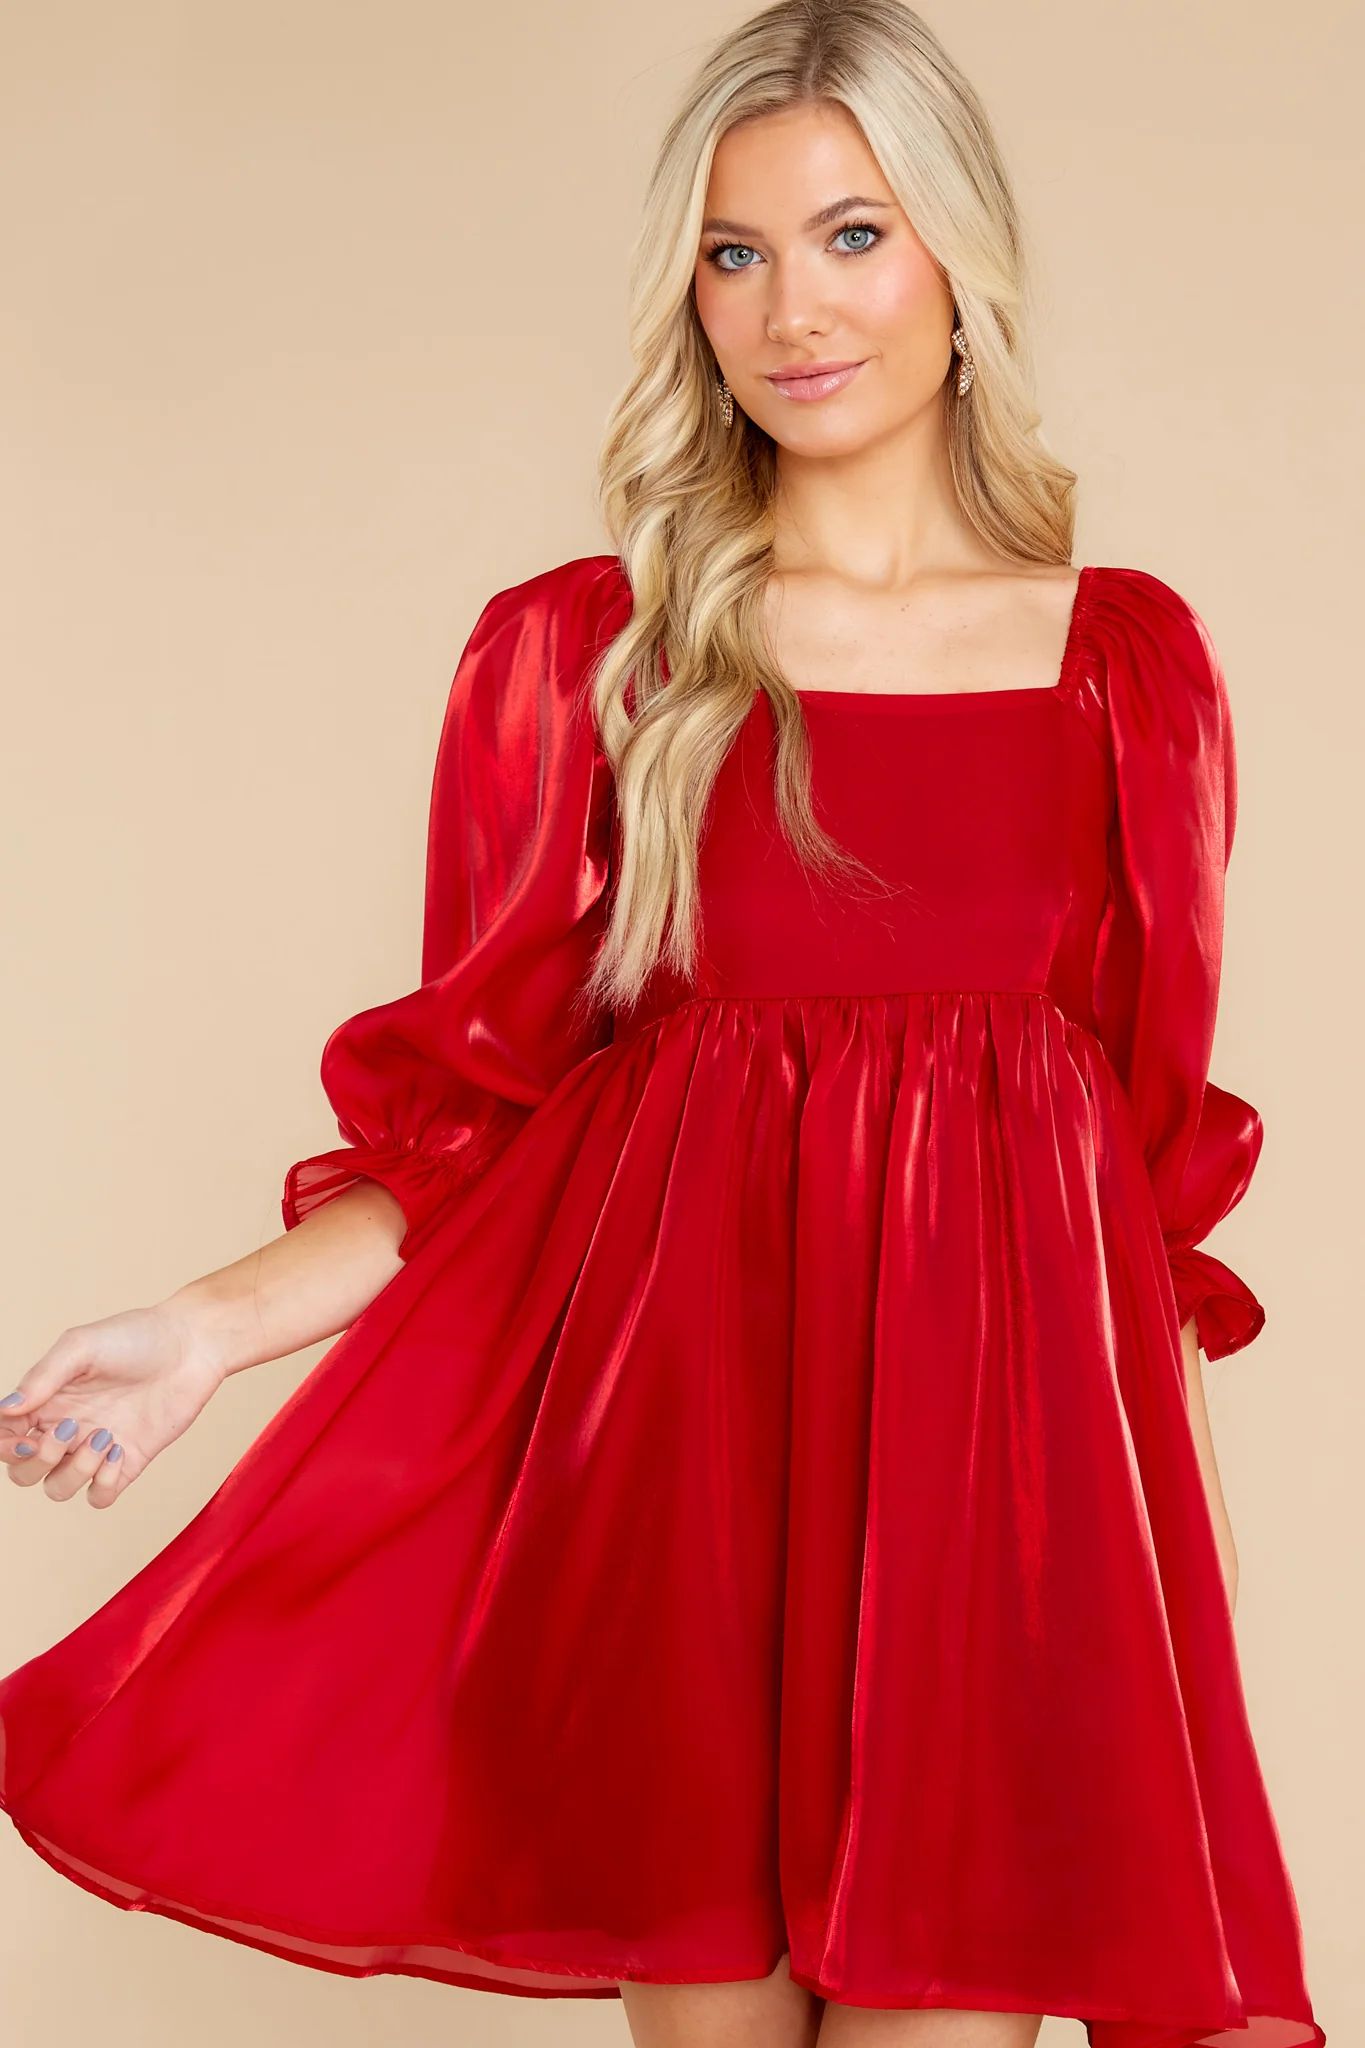 Madly In Love Ruby Red Dress | Red Dress 